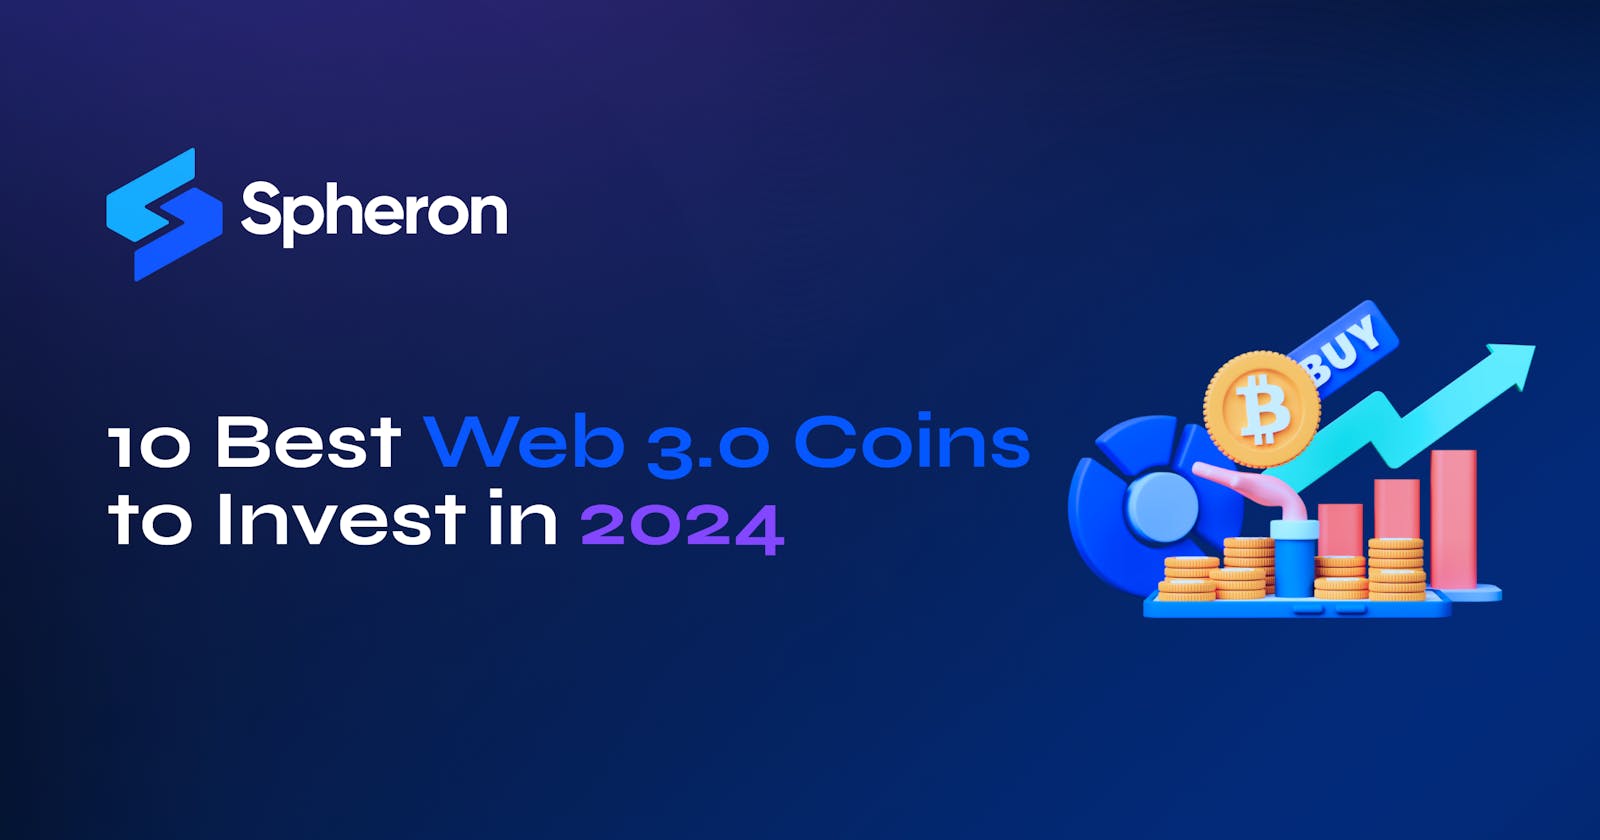 10 Best Web 3.0 Coins to Invest in 2024